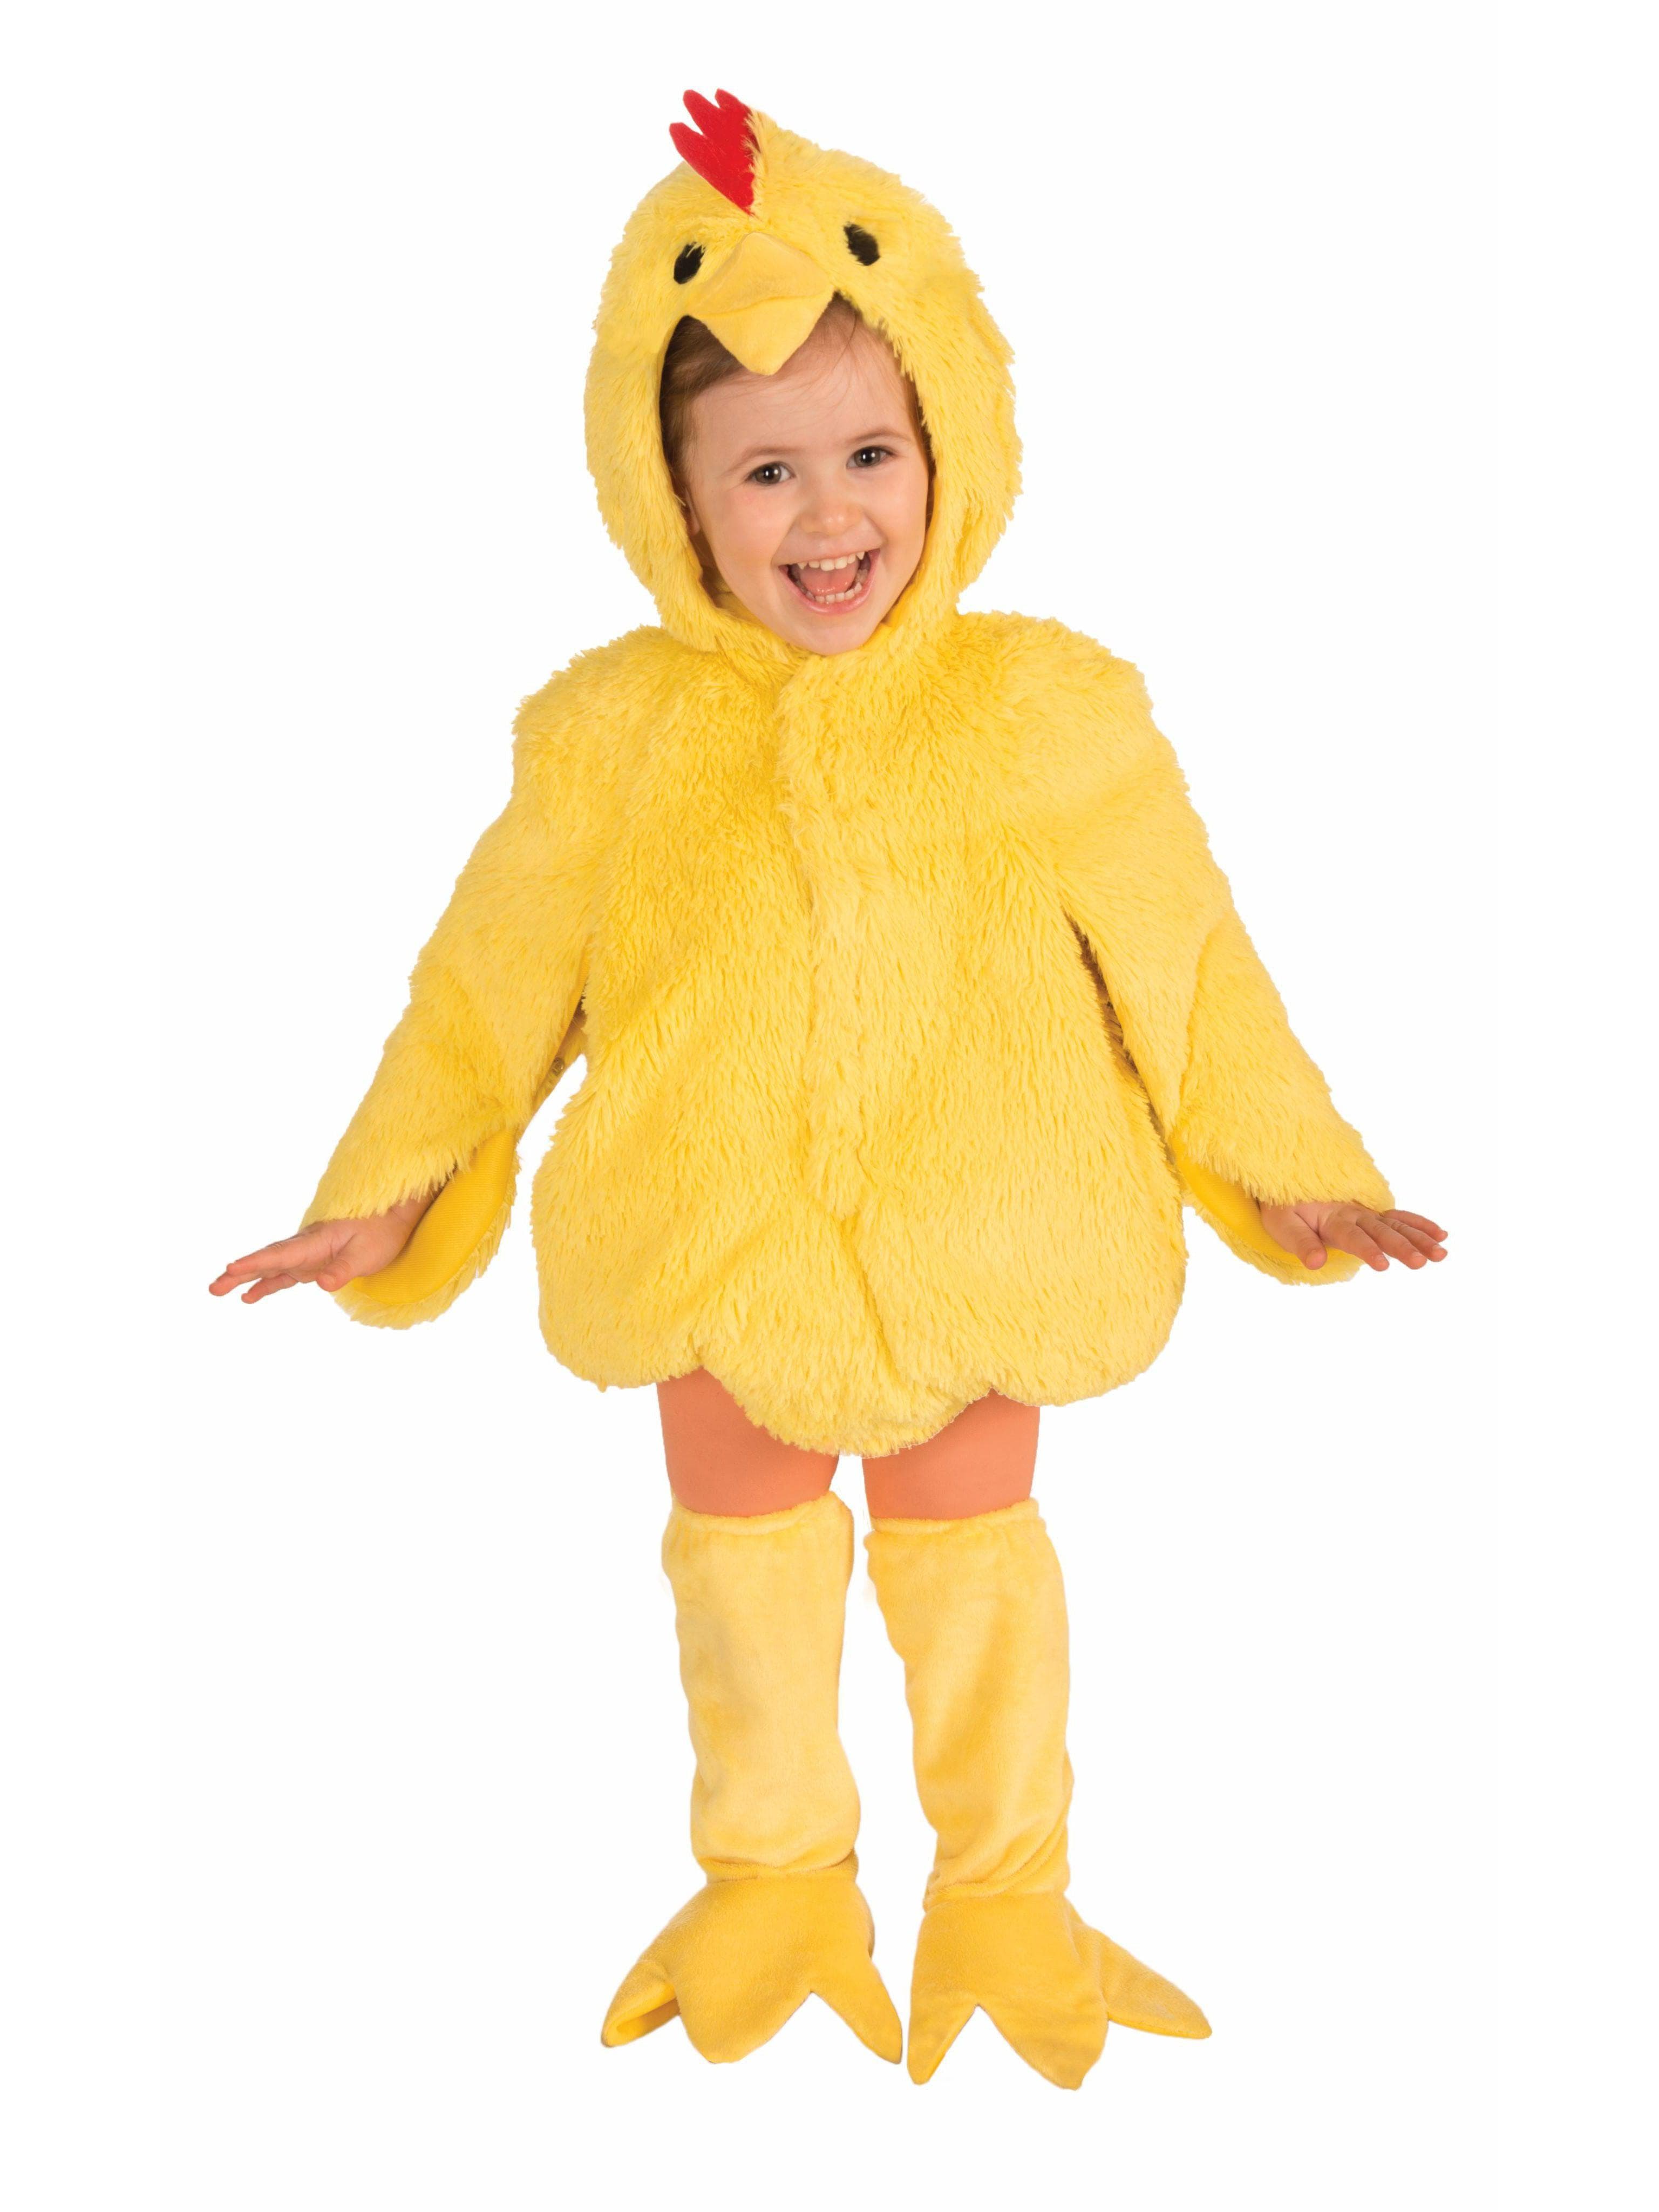 Yellow Plush Little Chick Costume for Toddlers - costumes.com